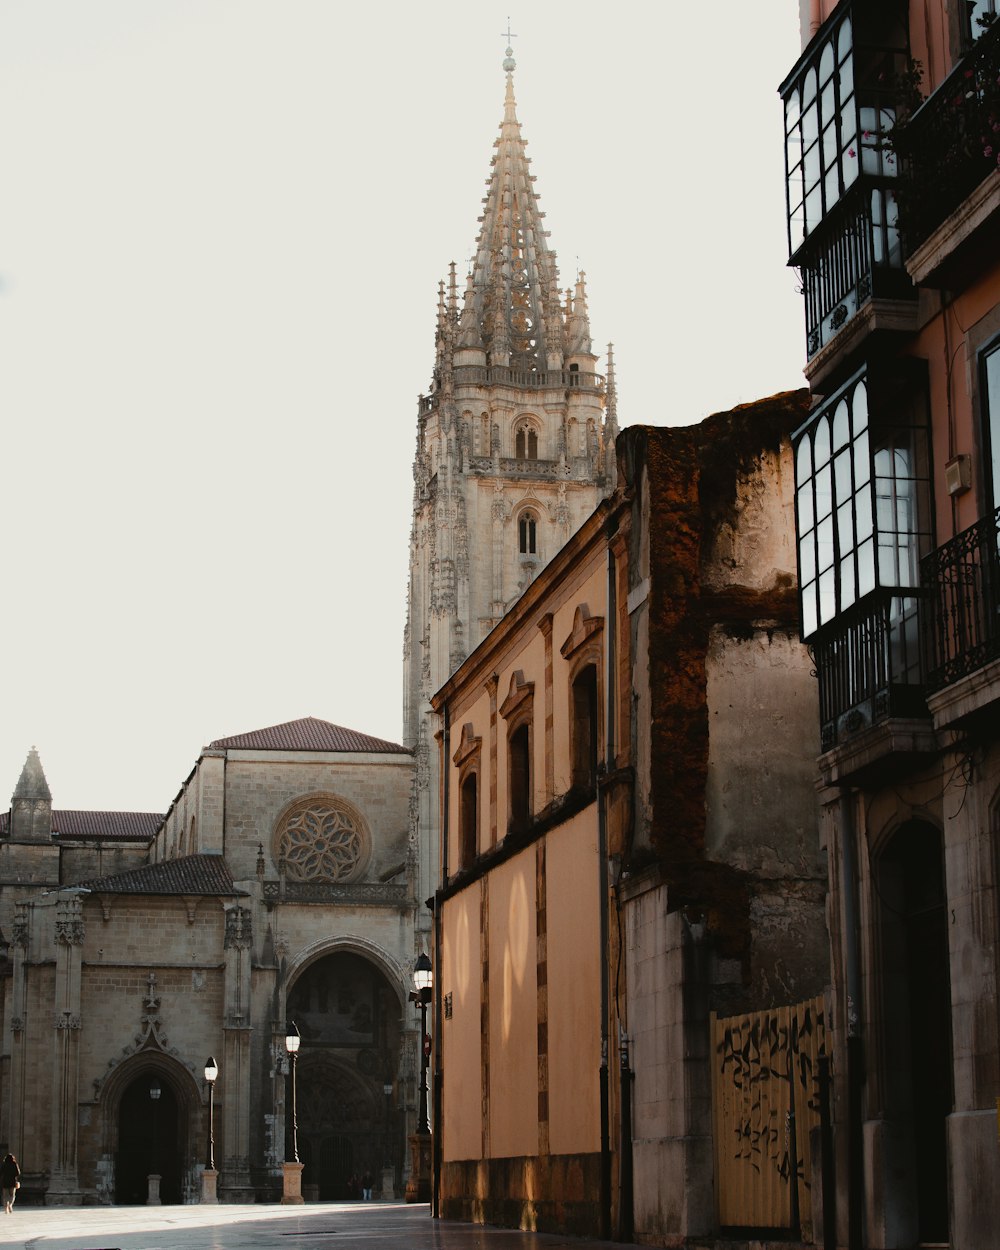 a large cathedral towering over a city street